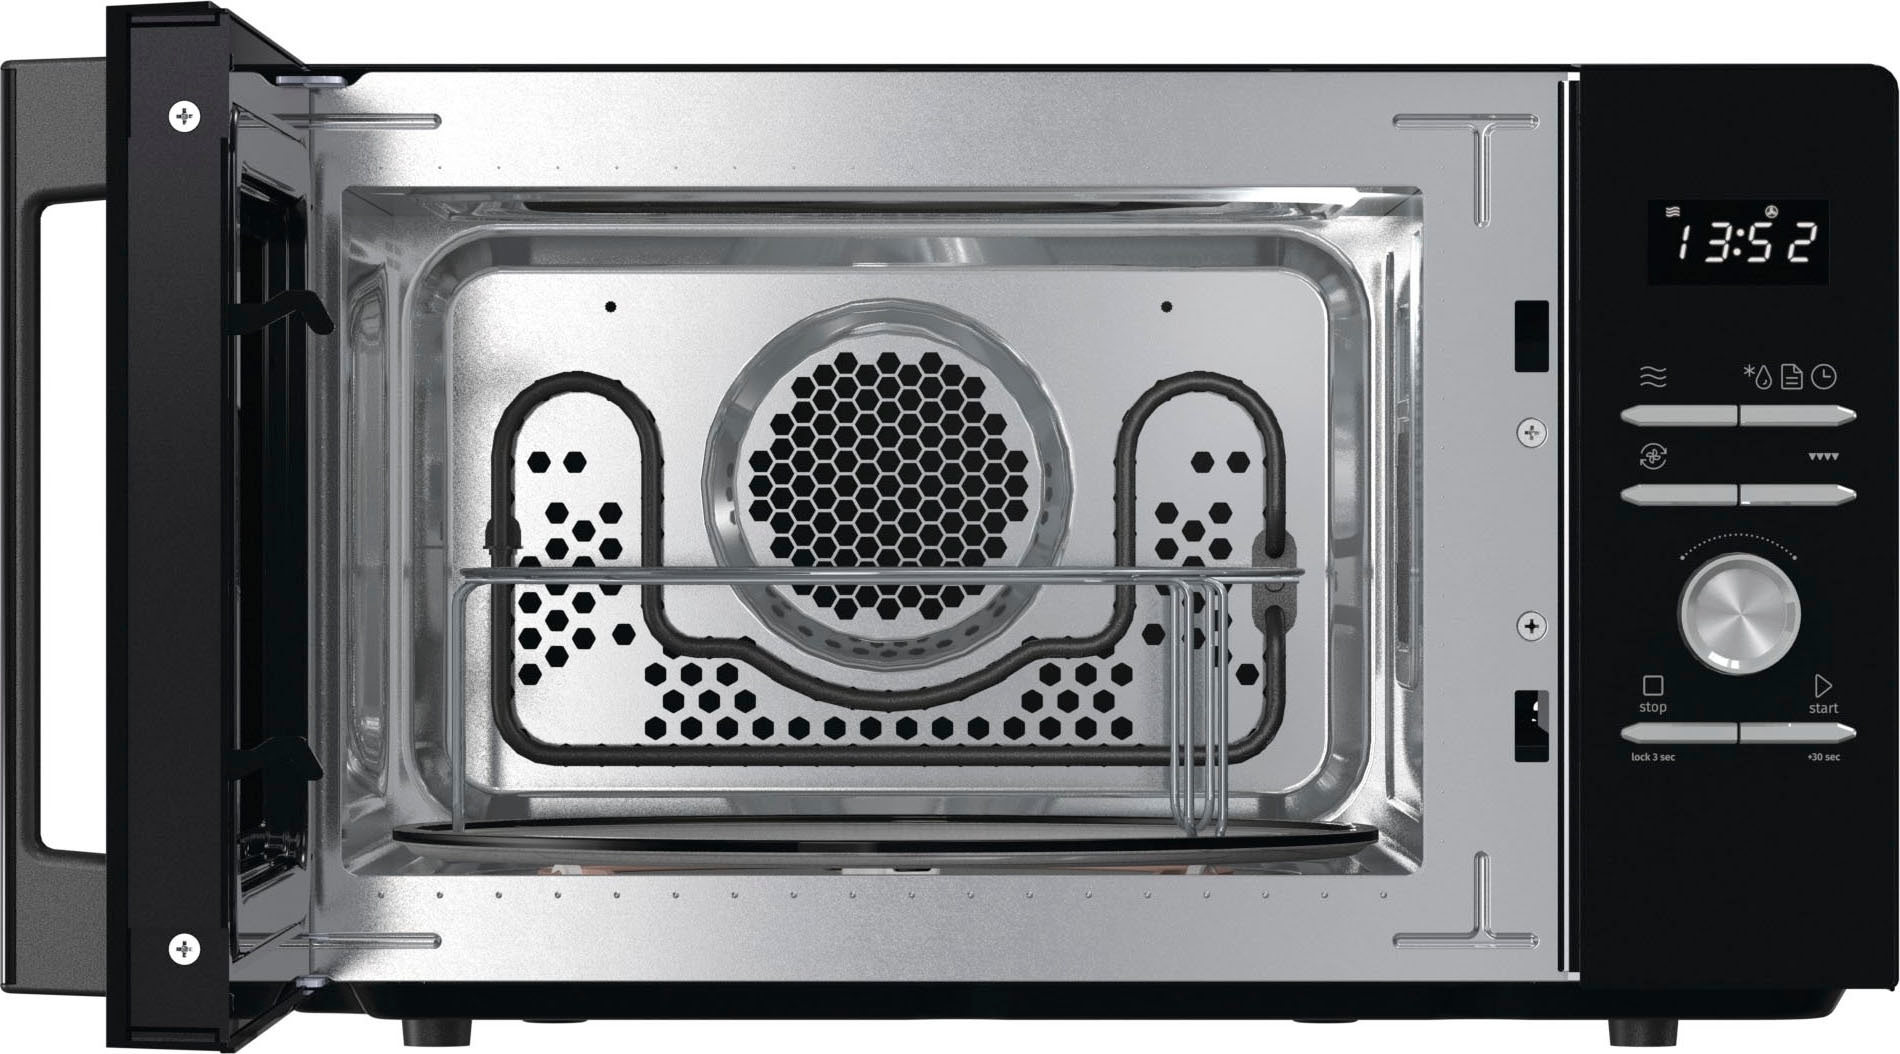 GORENJE Mikrowelle »MO 28 A5BH«, Umluft-Grill, 900 W